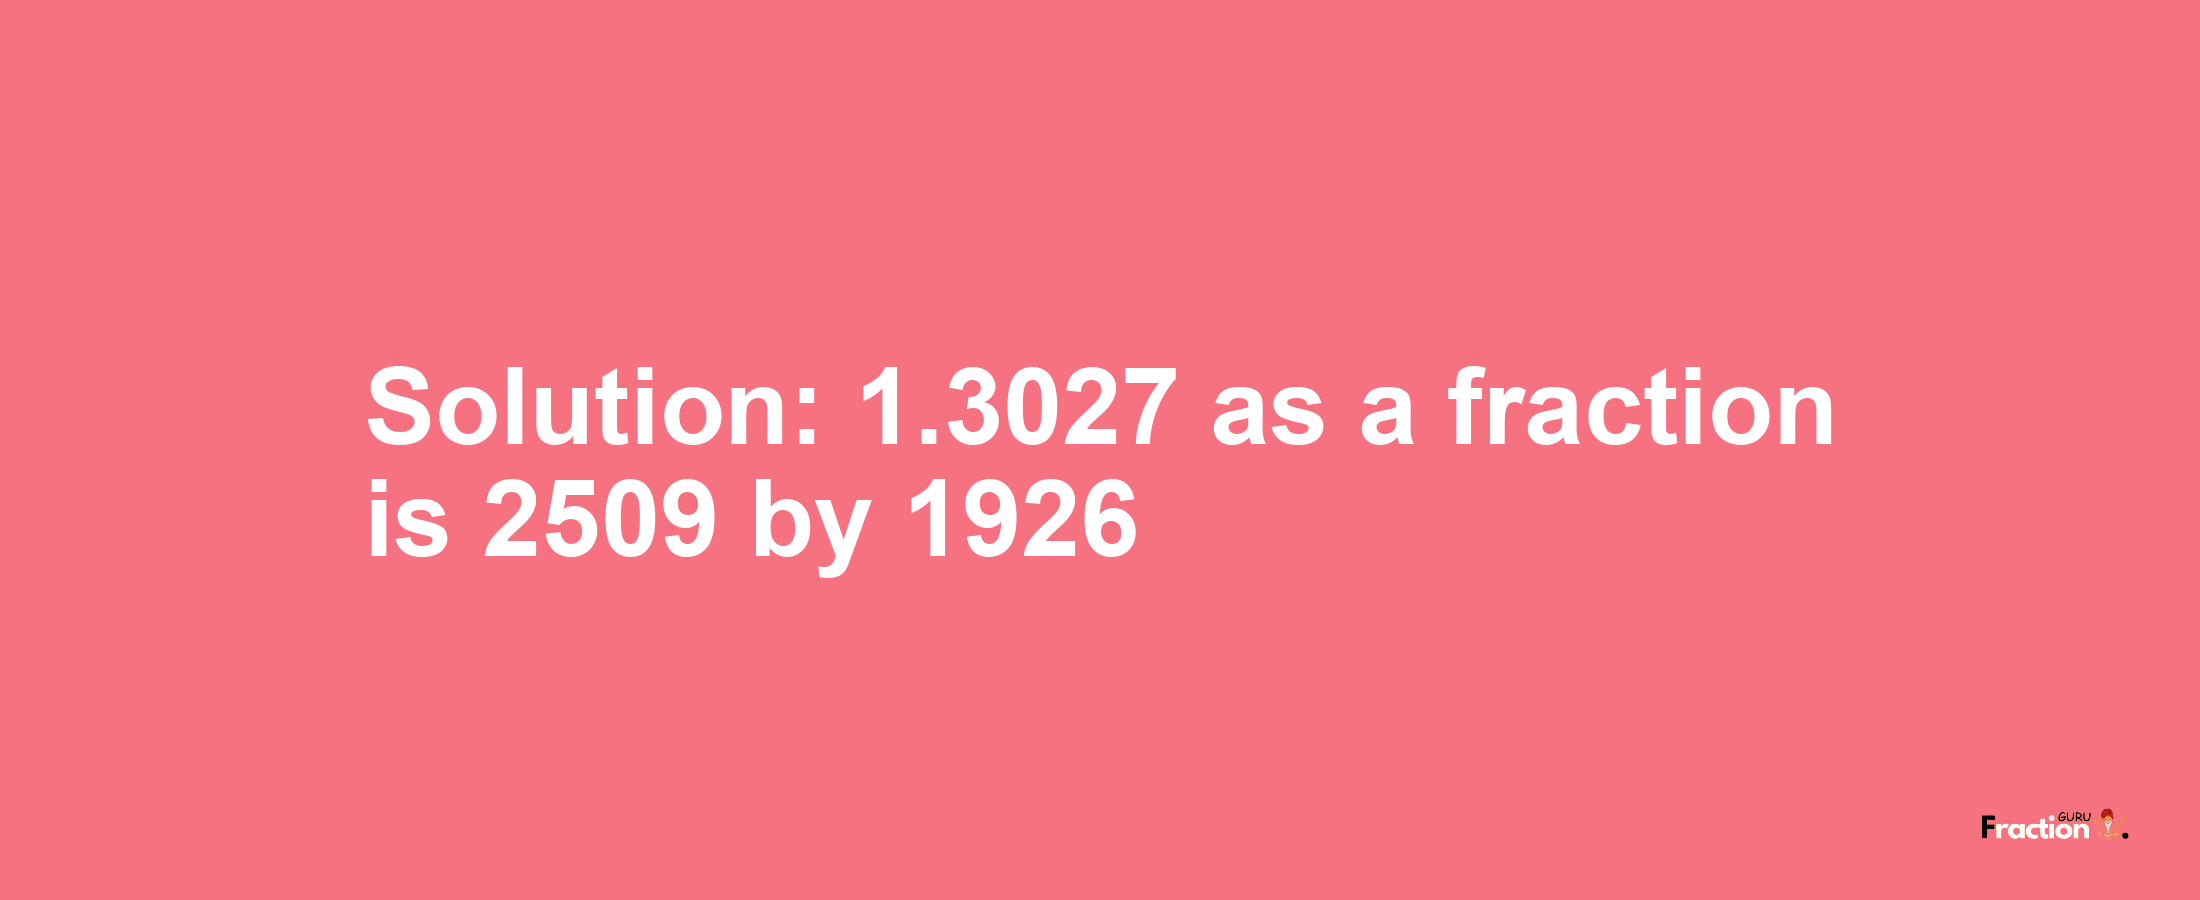 Solution:1.3027 as a fraction is 2509/1926